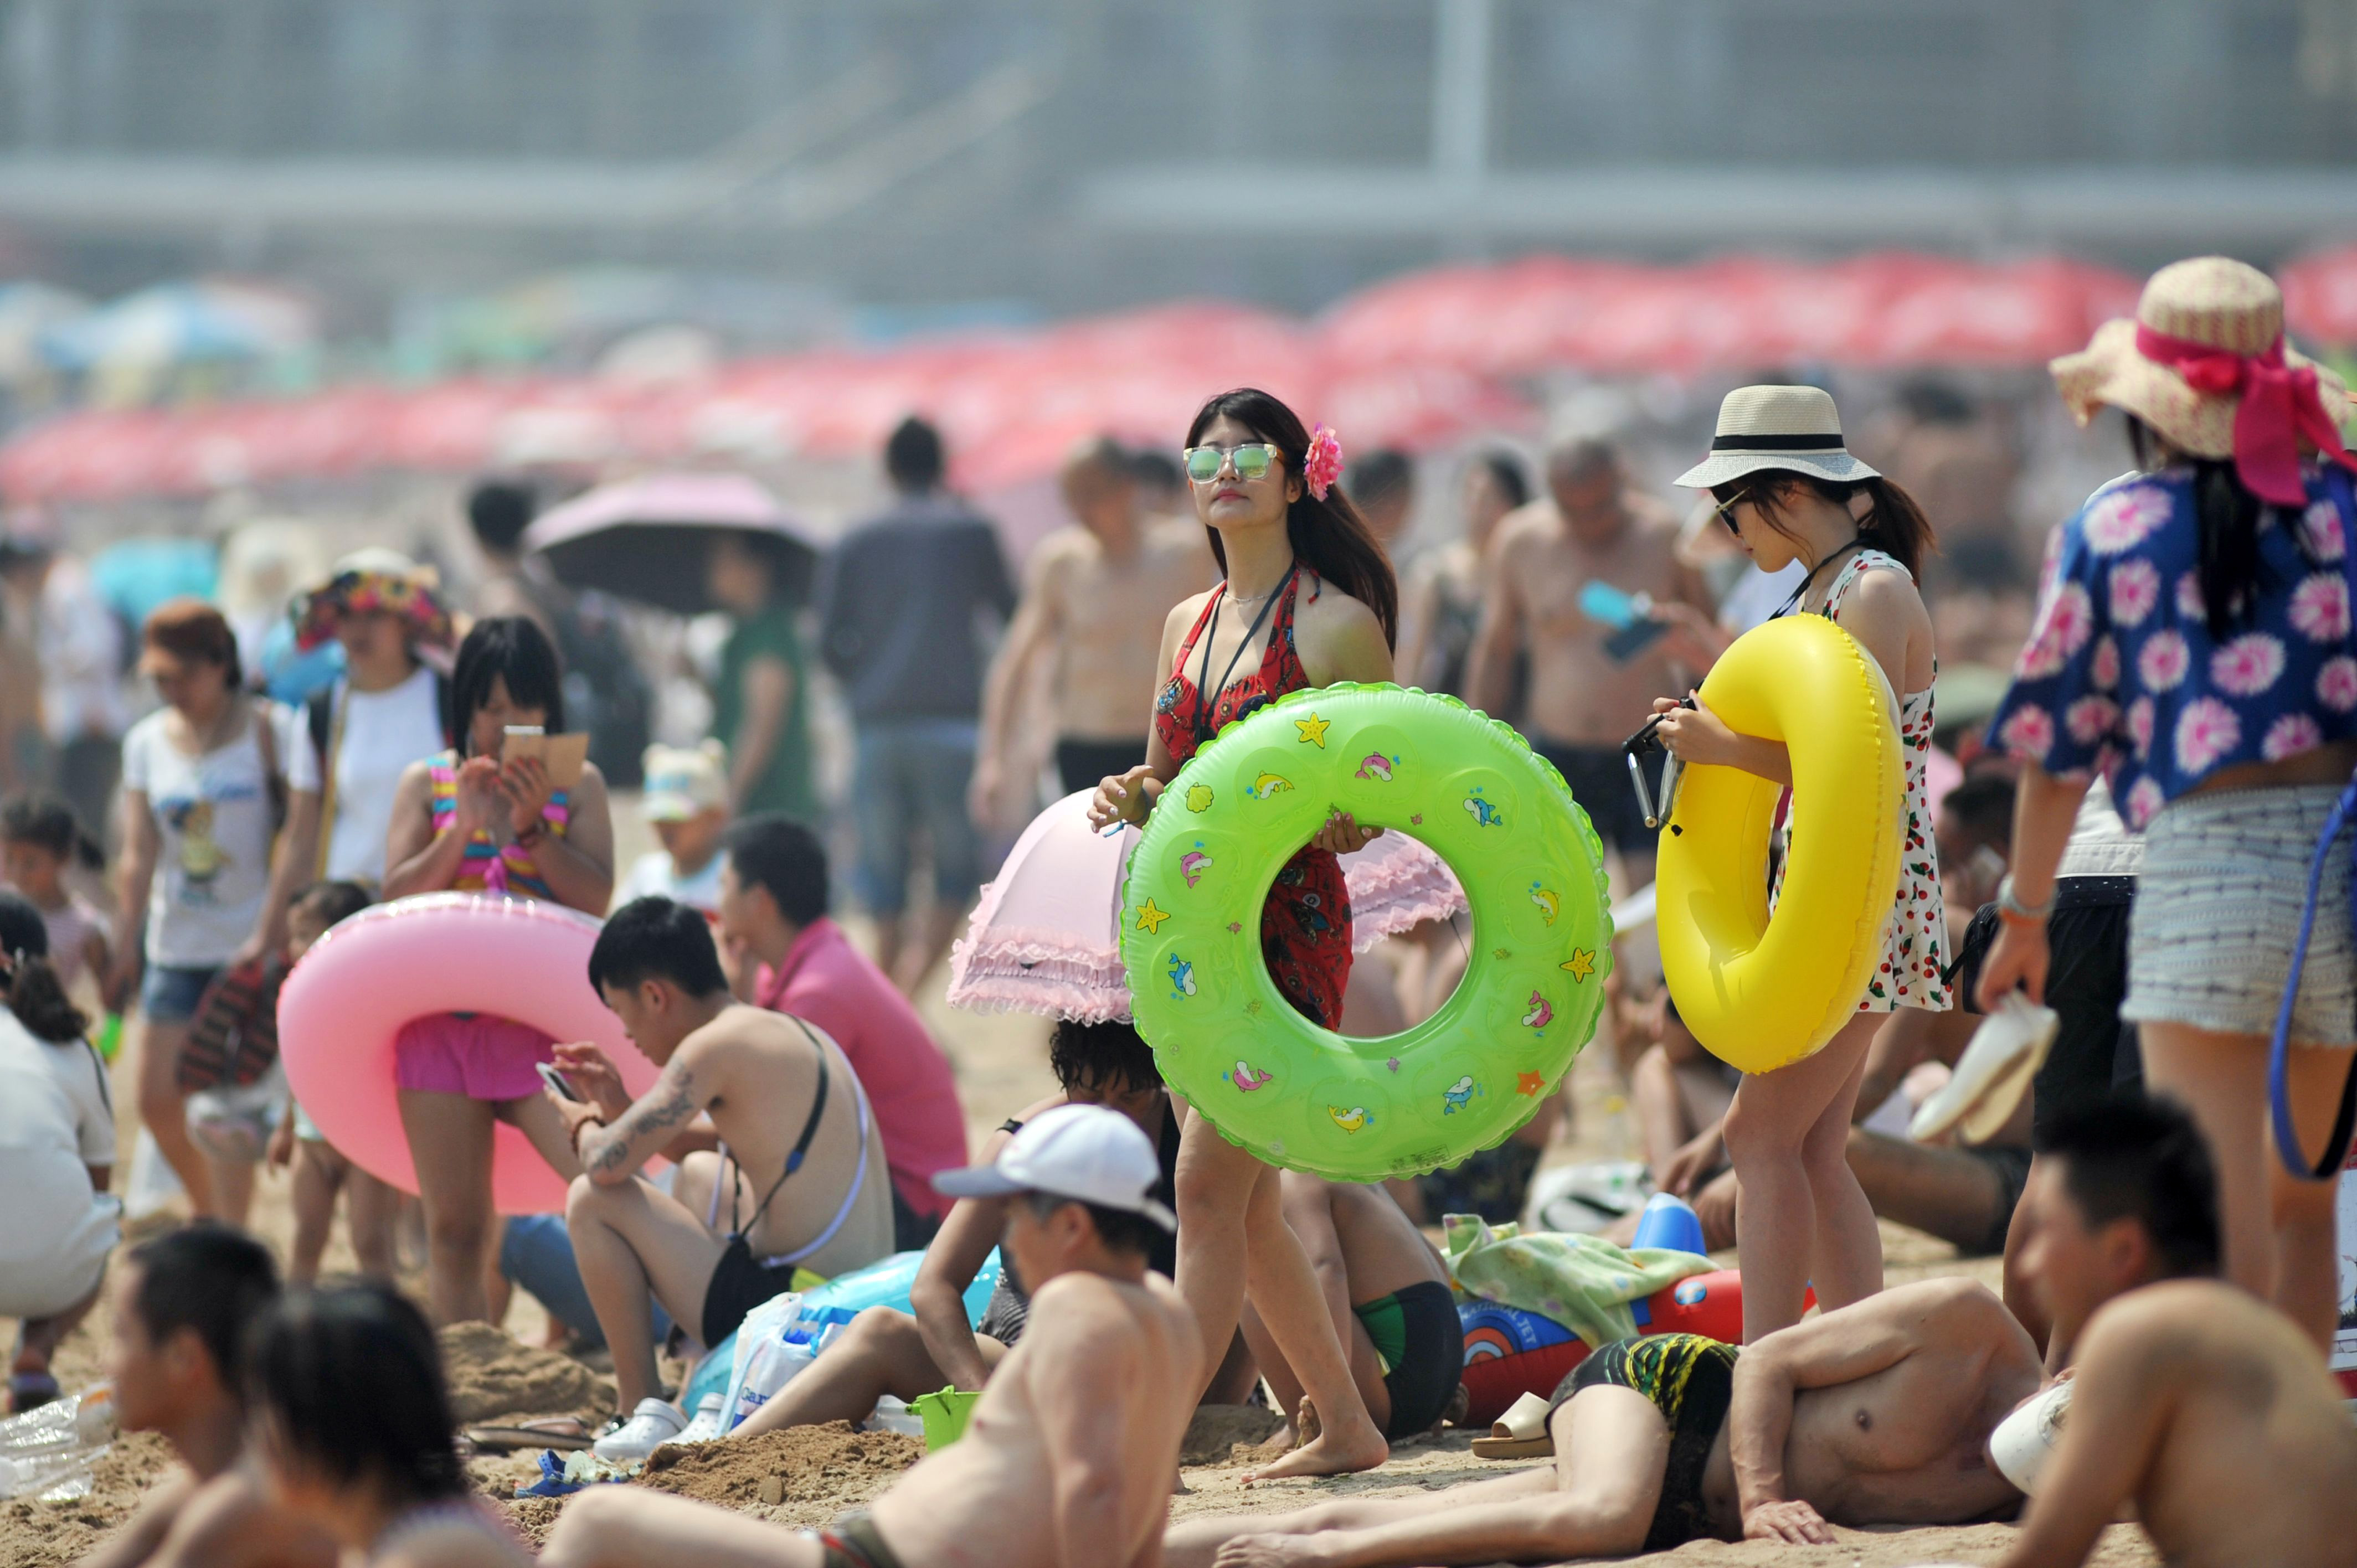 Visitors crowd a seaside beach on the first day this summer that it was open to the public in Qingdao in eastern China's Shandong province Wednesday, July 1, 2015. China's beaches are a popular destination for its citizens to escape the summer heat. (Chinatopix Via AP) CHINA OUT